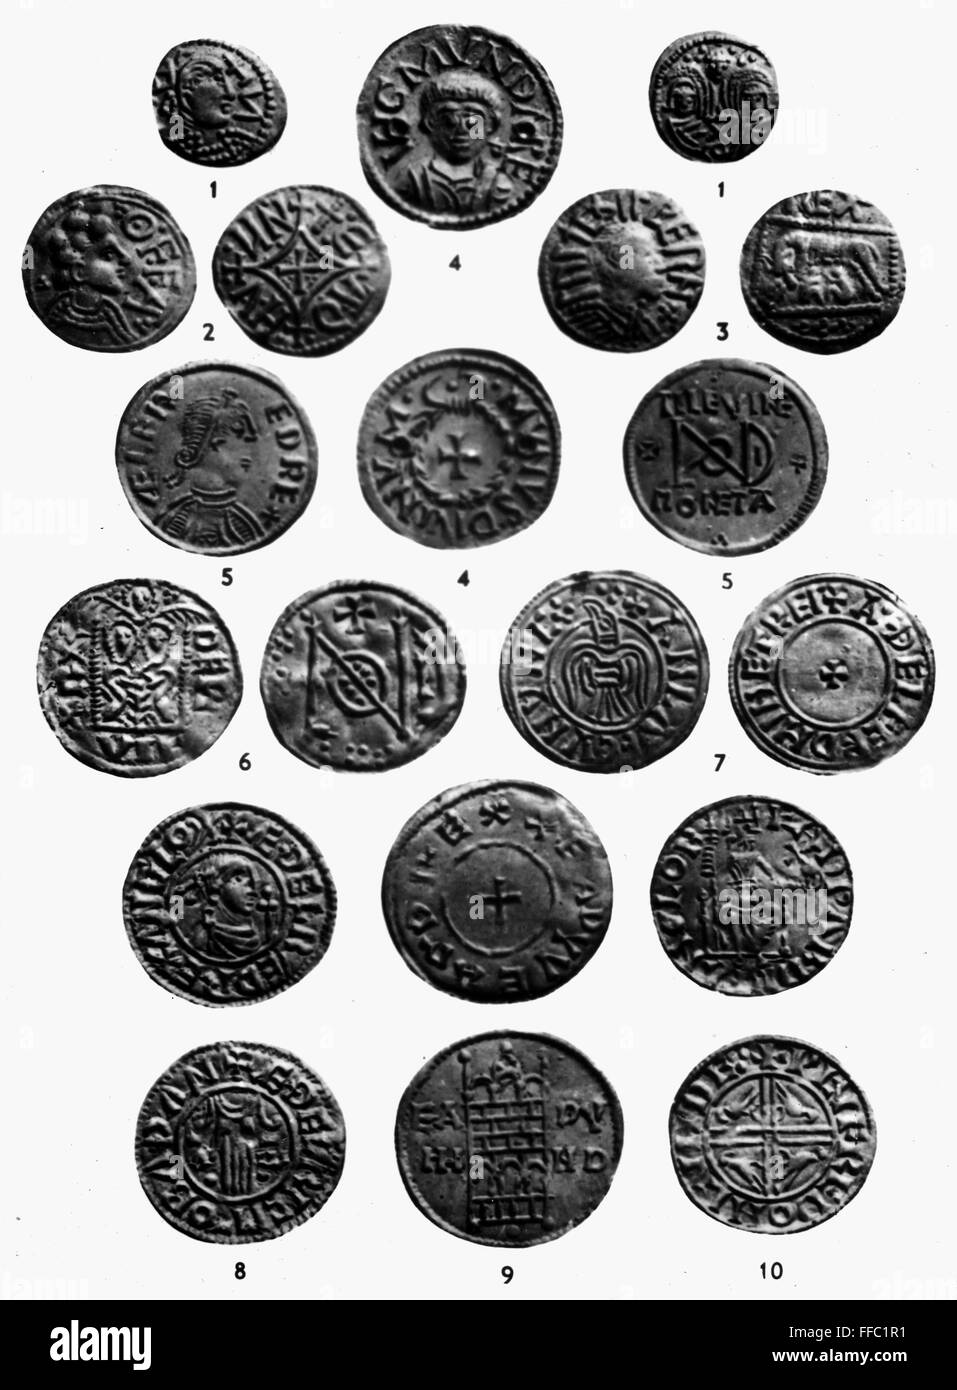 ANGLO-SAXON COINS. /nAnglo-Saxon and Danish coins: 1. Seventh century sceat; 2. Offa of Mercia; Aethelberht of East Anglia; 4.Wigmund, Archbishop of York (gold); 5. Alfred of Wessex; 6. Halfdan; 7. Olaf Guthfrithsson; 8. Aethelred II; 9. Edward the Elder; Stock Photo